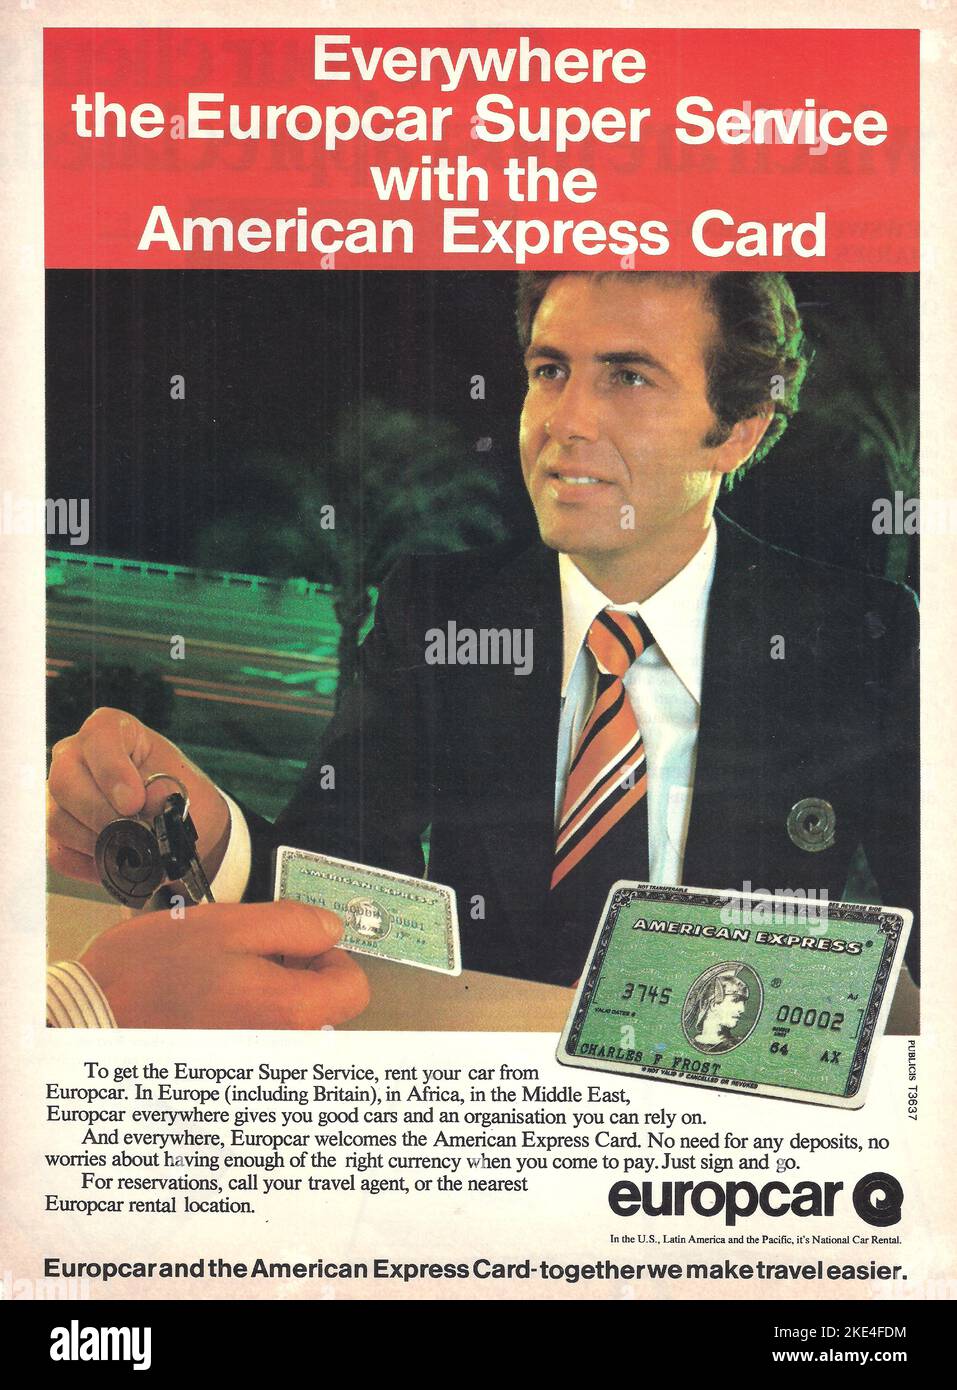 American Express card, magazine advertisement Europcar Super Service with the American Express Card Stock Photo